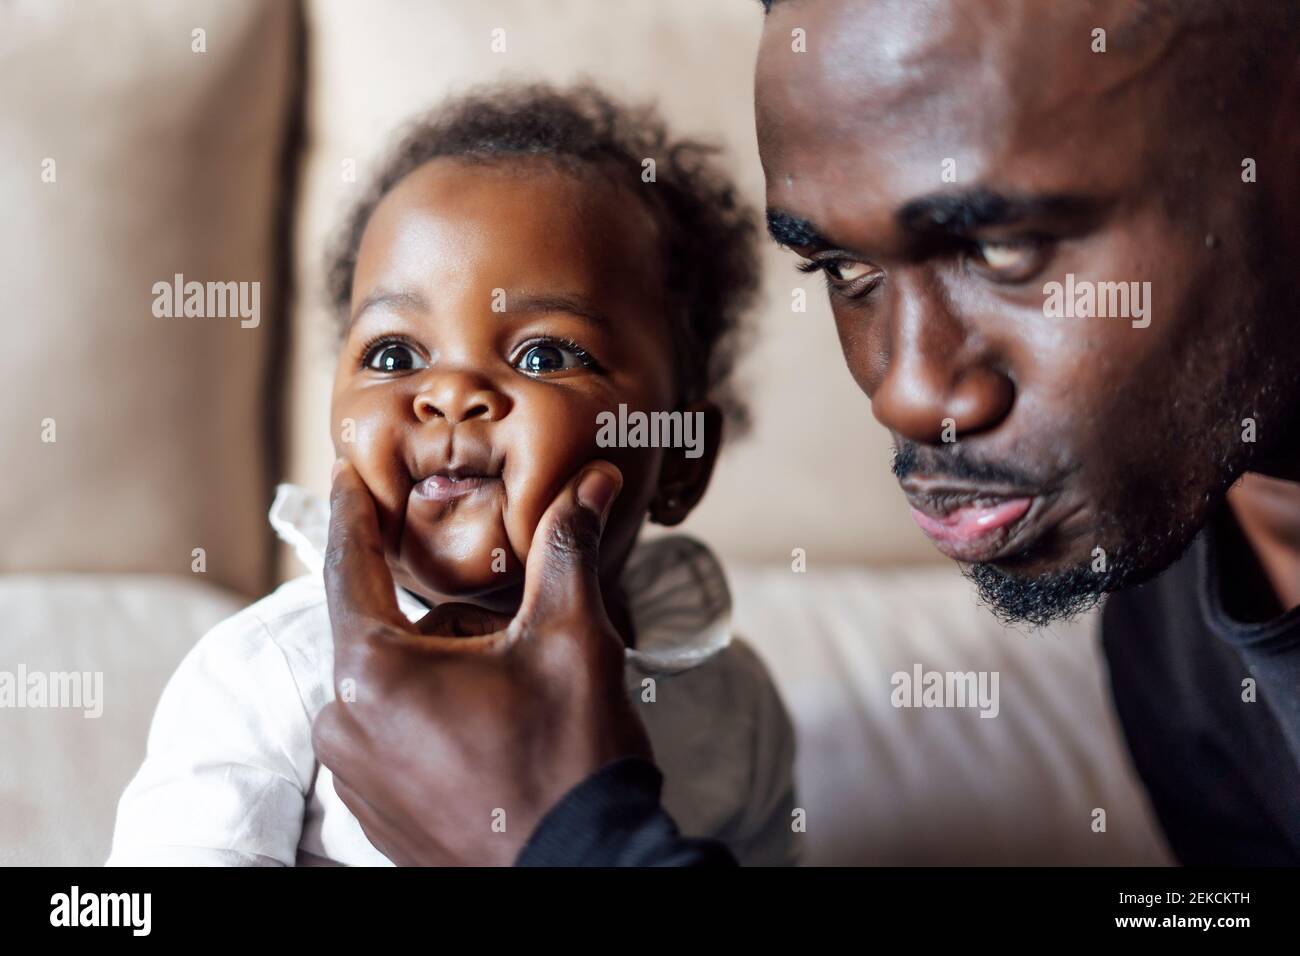 Playful father squeezing baby girl's cheeks at home Stock Photo